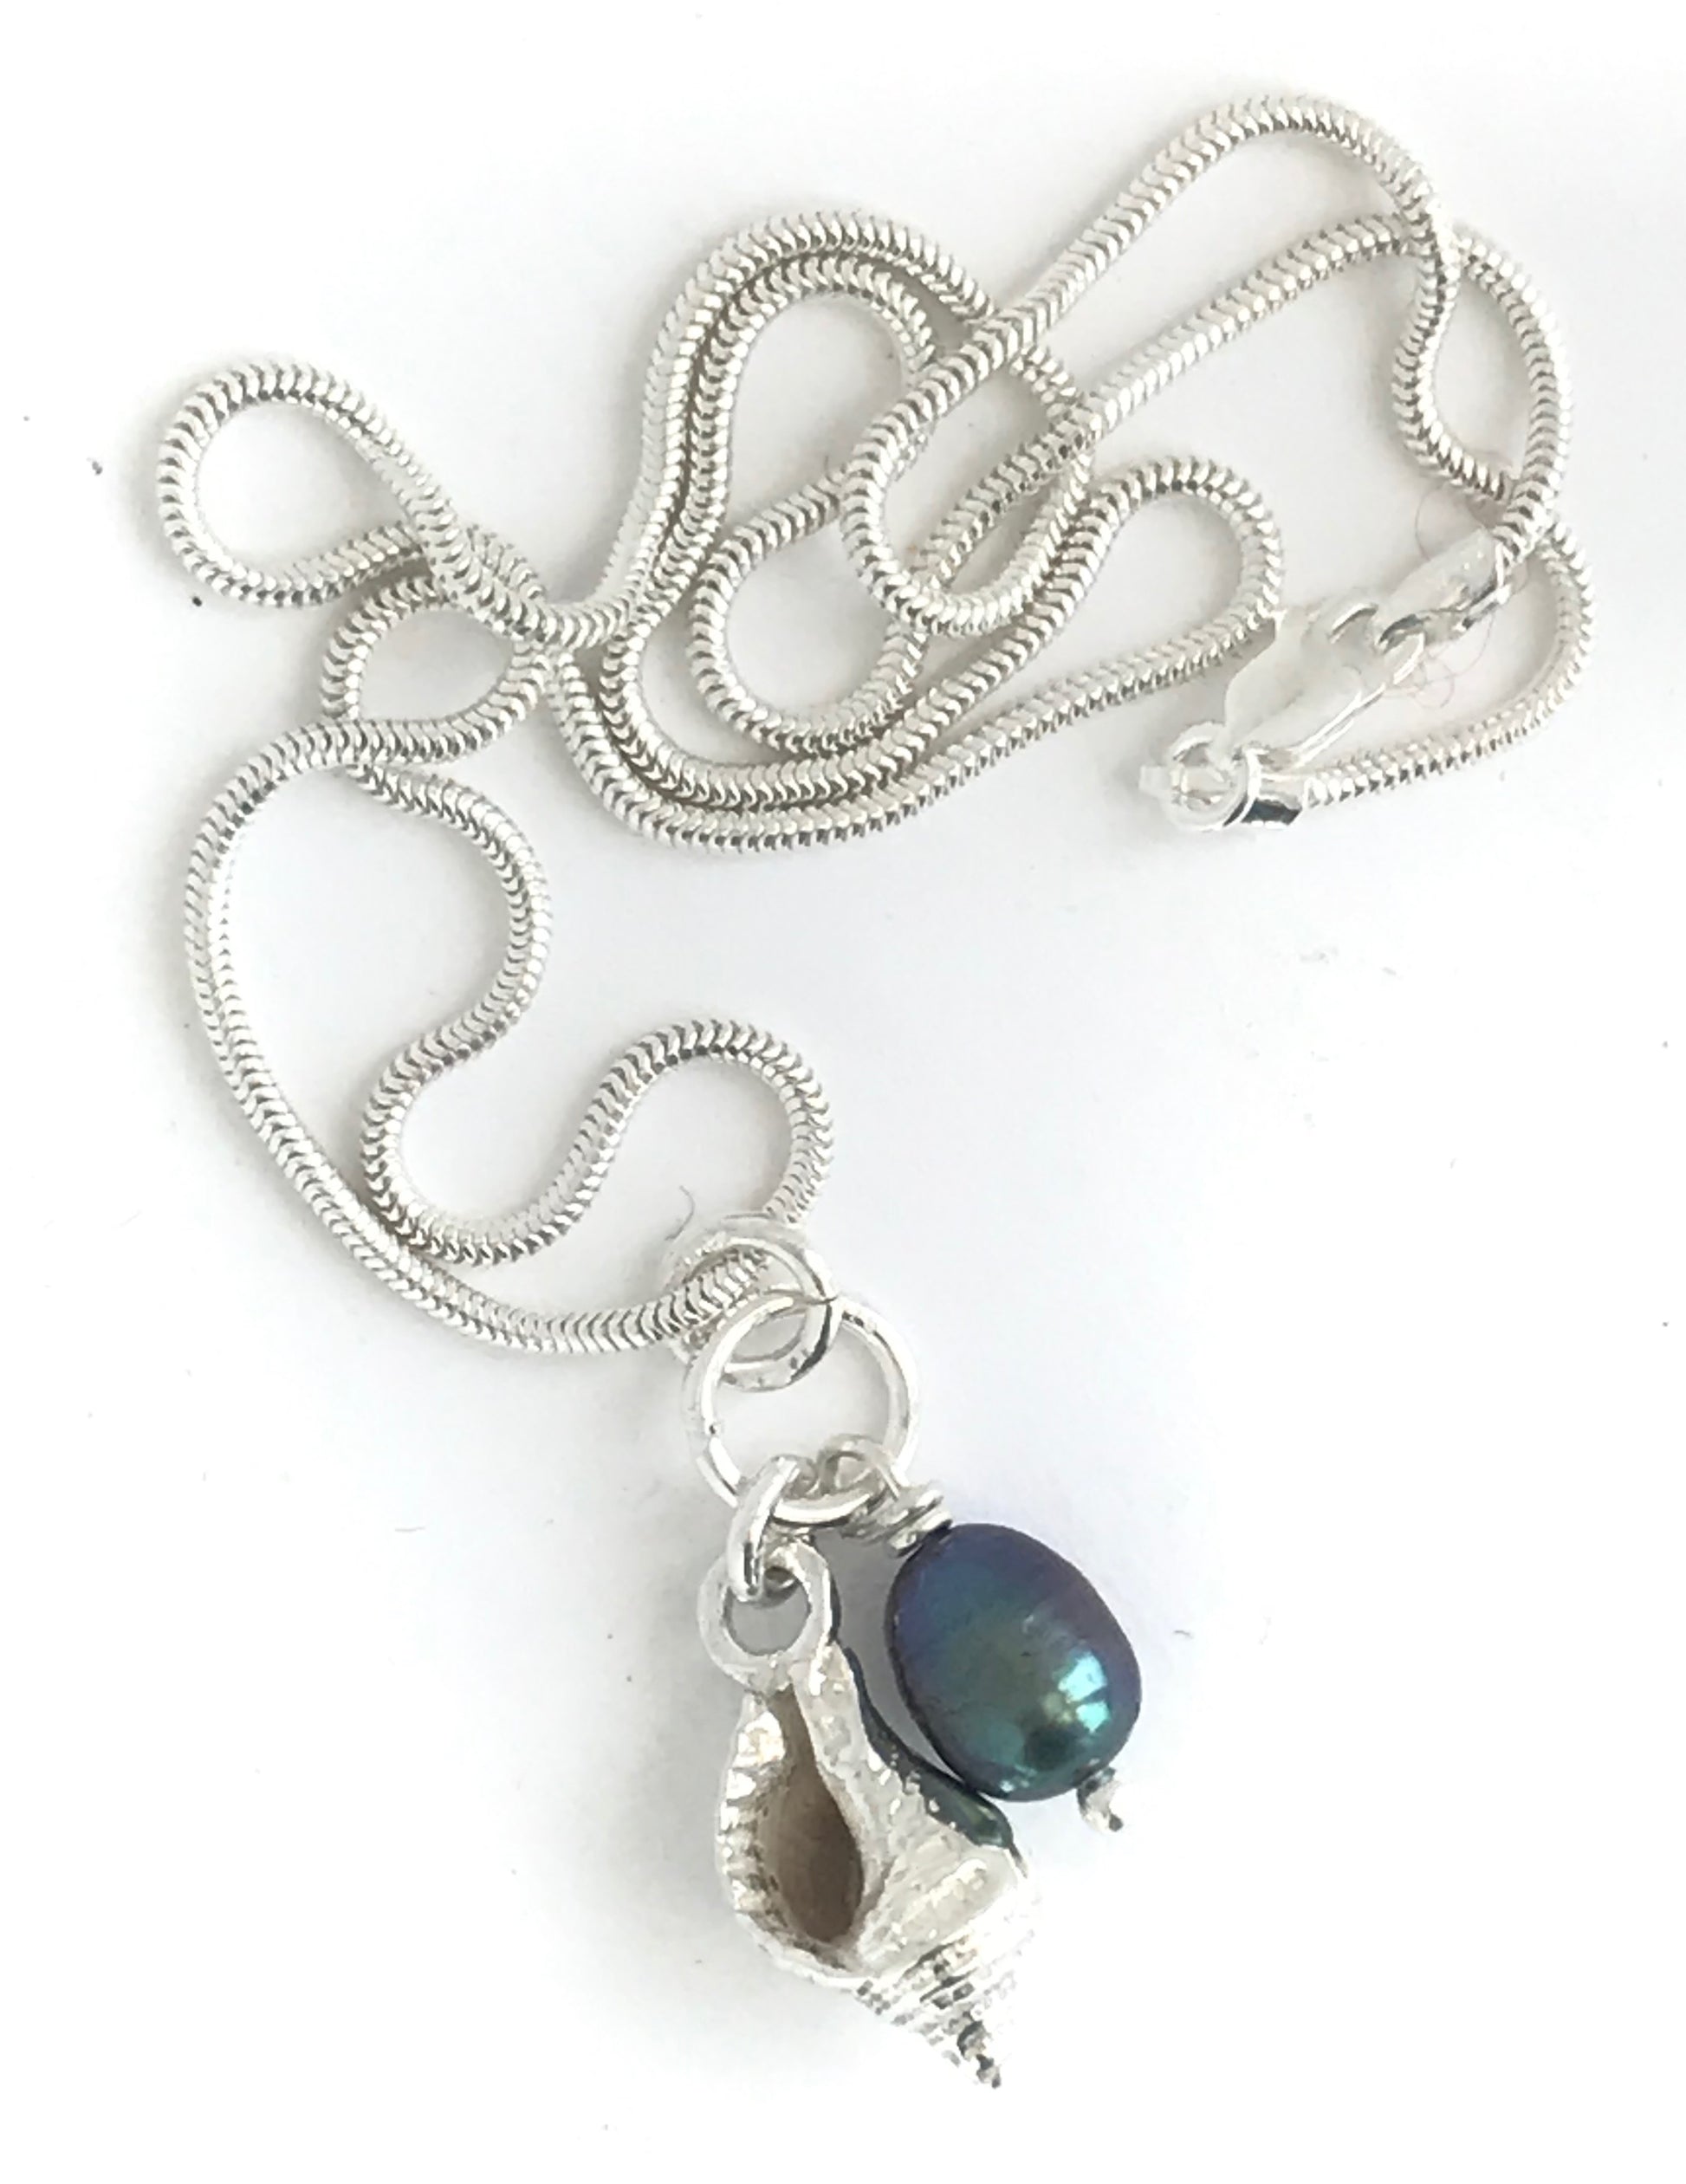 Whelk shell necklace with blue black pearl